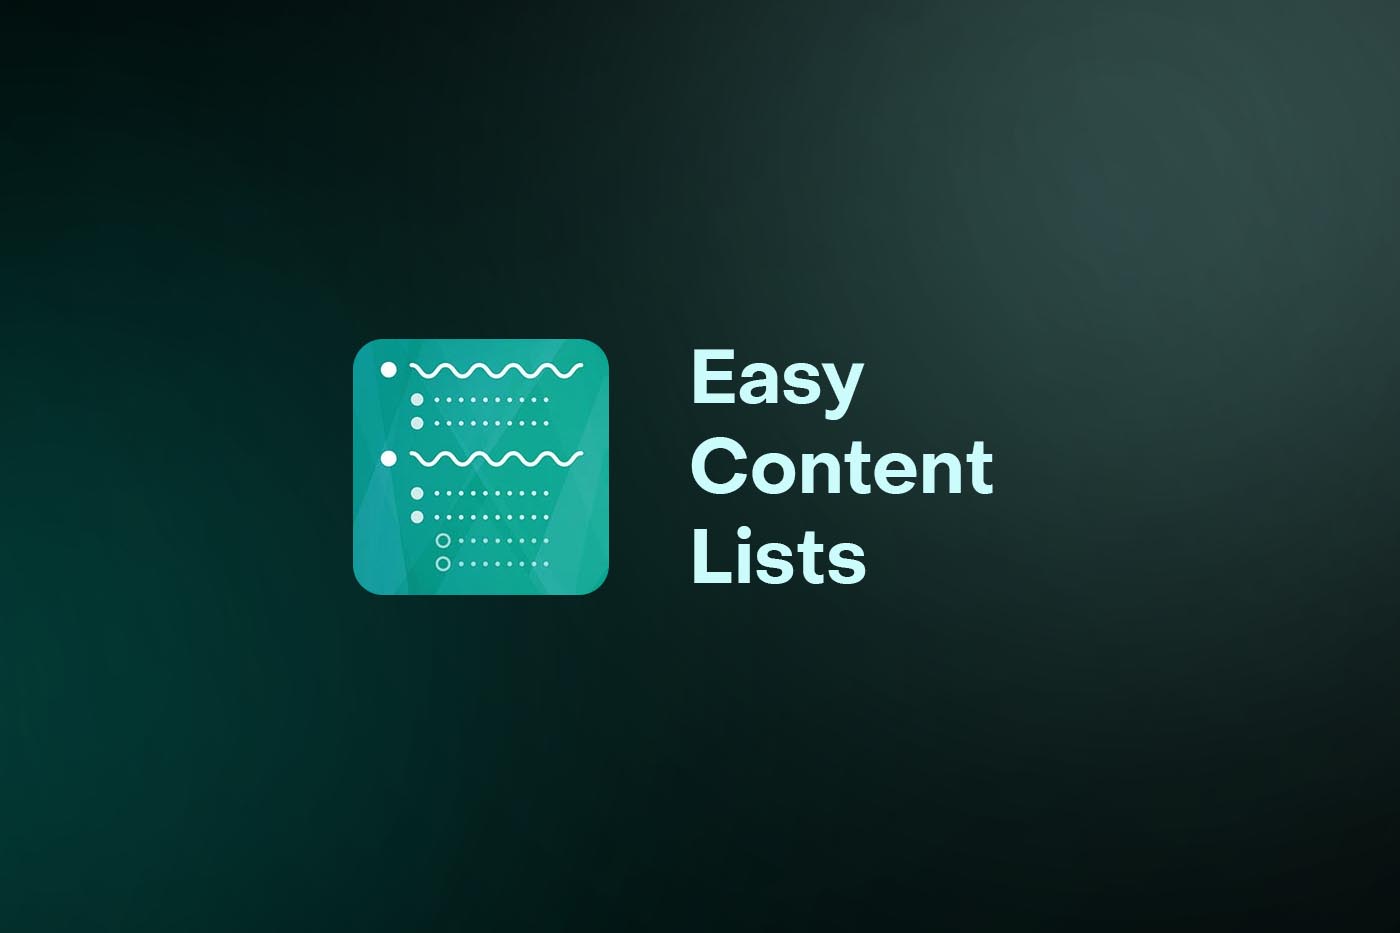 A minimalist graphic with a dark green gradient background features an icon of a document with various lines and dots, representing a list. Next to the icon, the words 